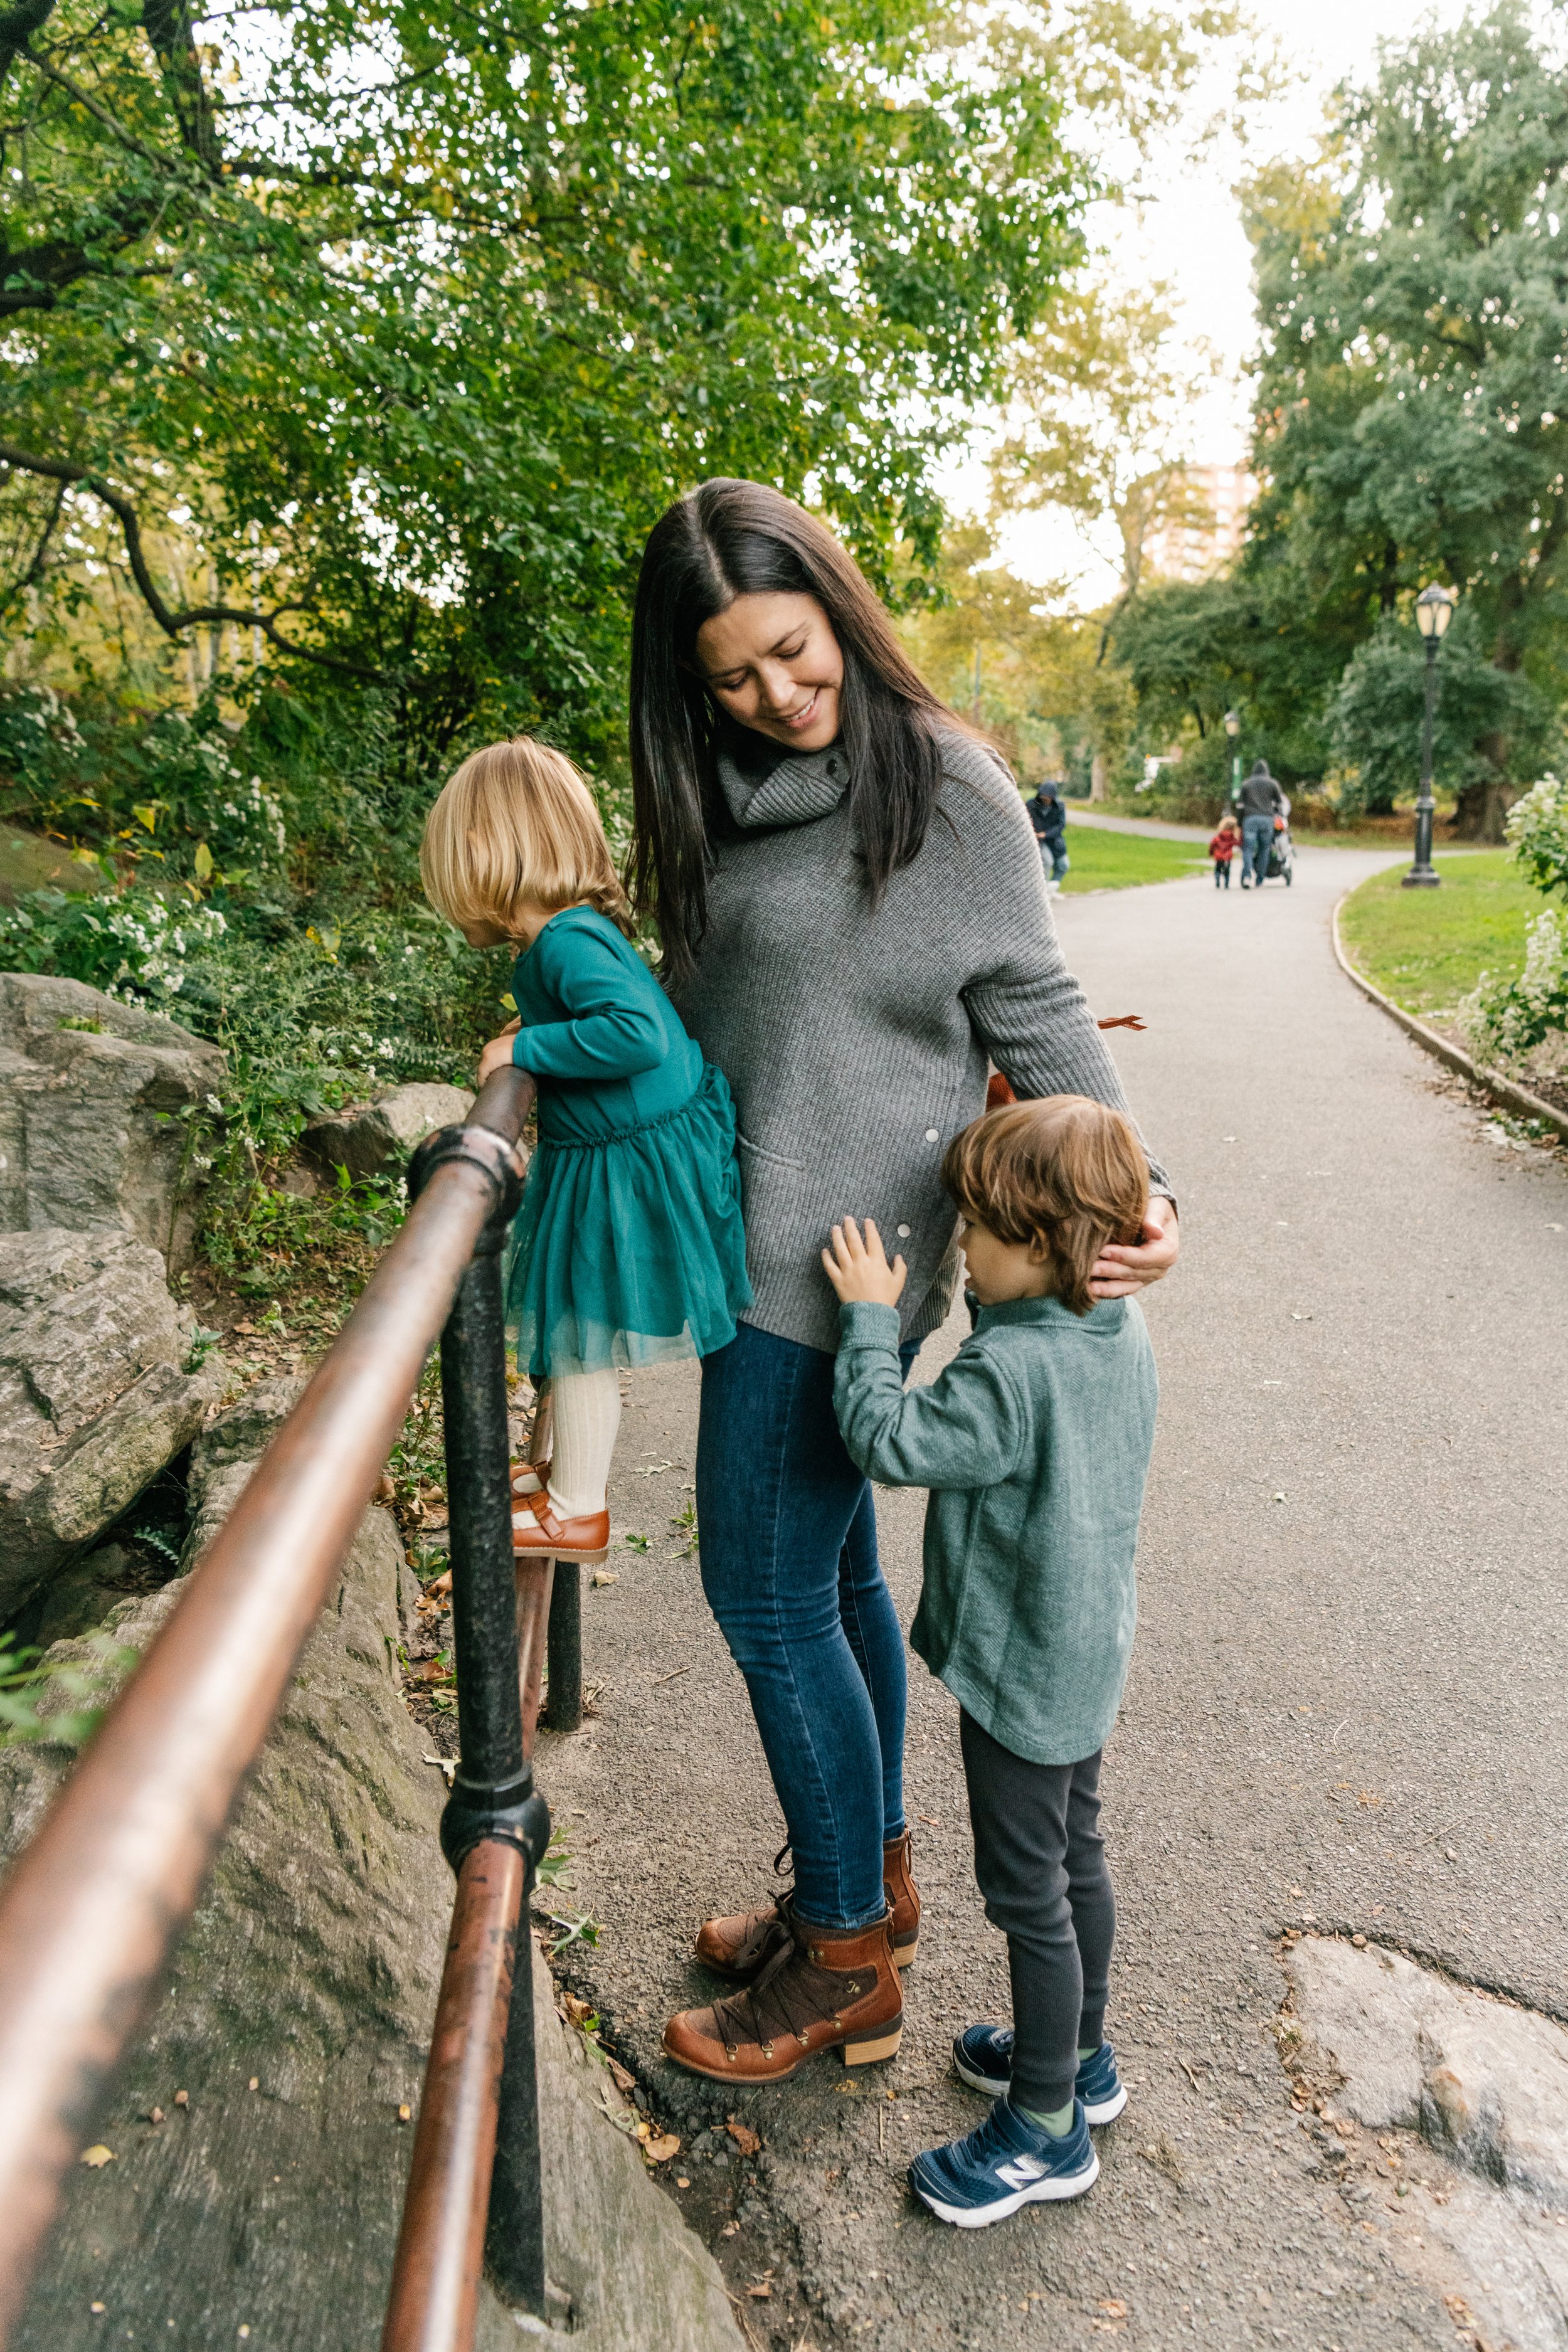  A candid portrait of two kids playing with their mother at Central Park was taken by Nicole Hawkins Photography. candid family portrait shots mother and children playing #NicoleHawkinsPhotography #NicoleHawkinsFamilies #NJphotographers #familyphotos